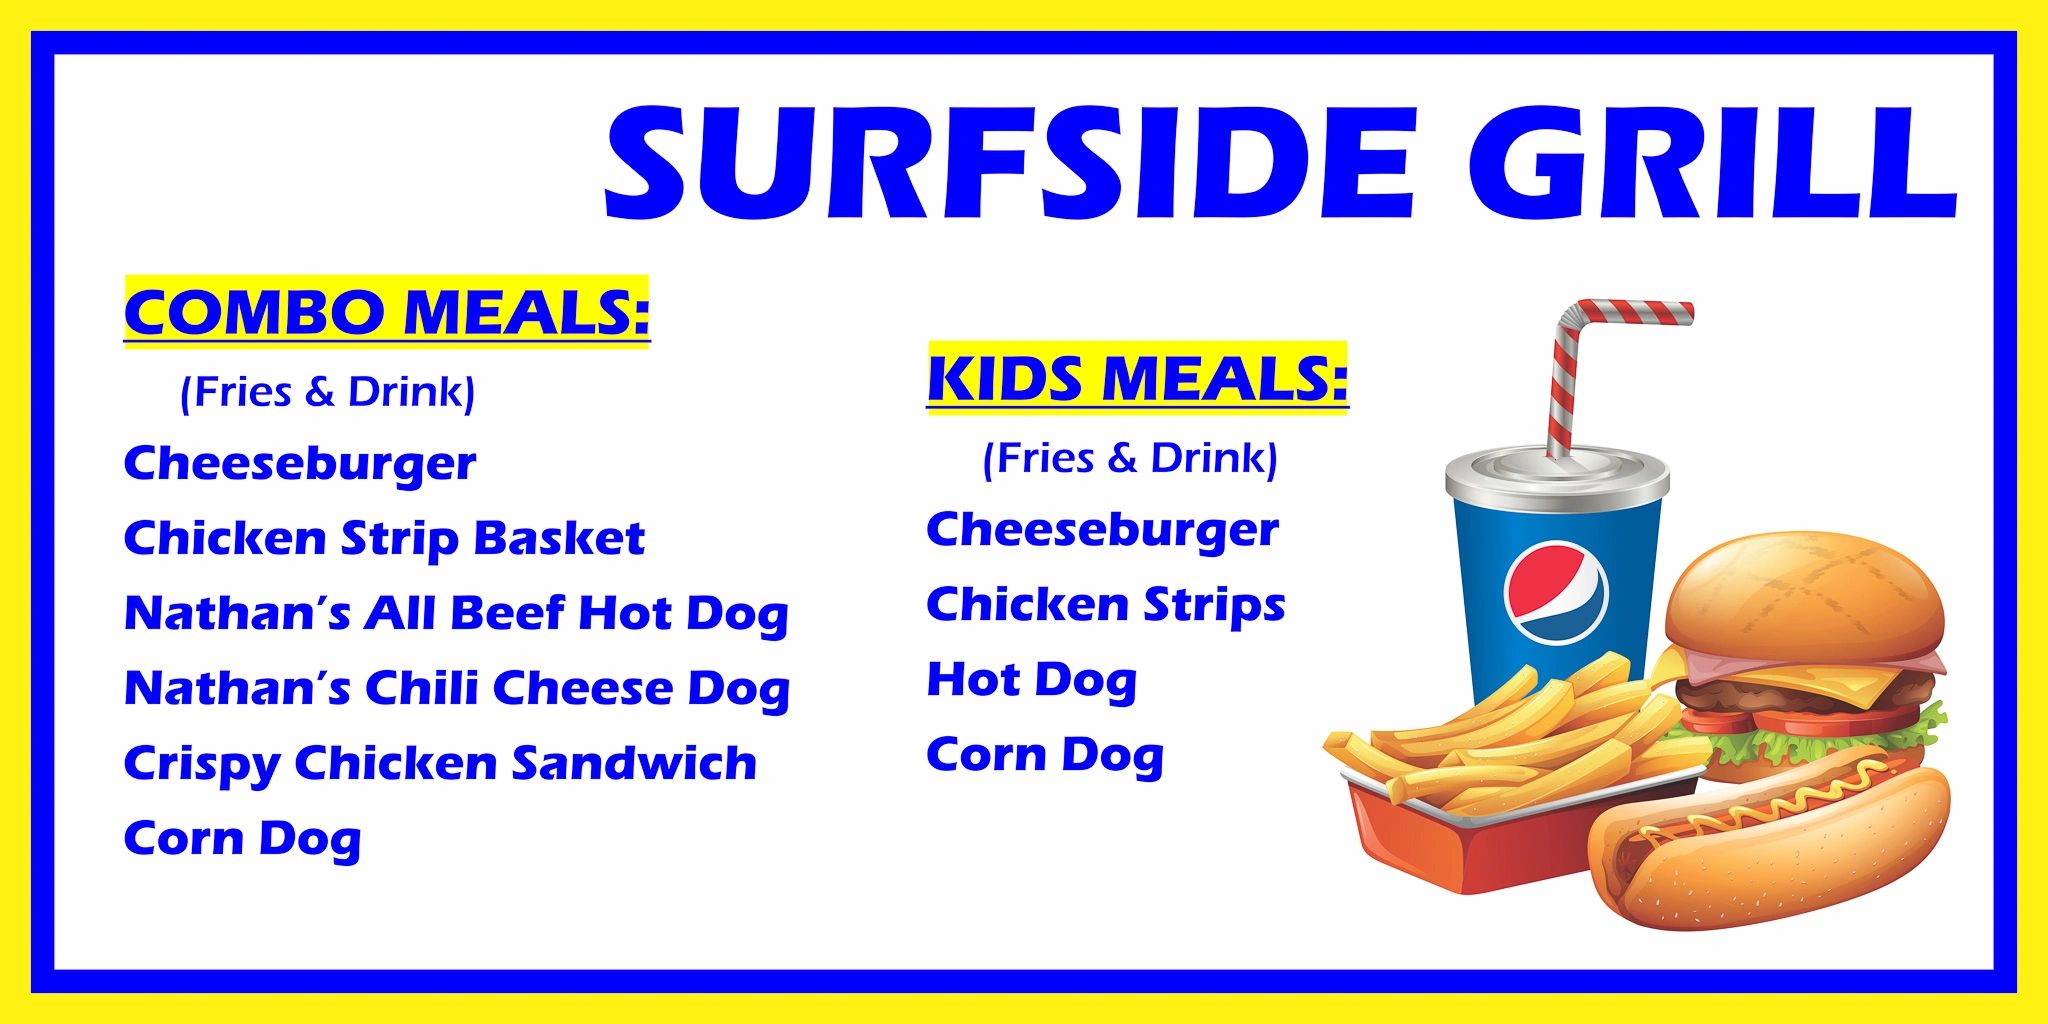 Surfside grill combo meals and kids meal poster